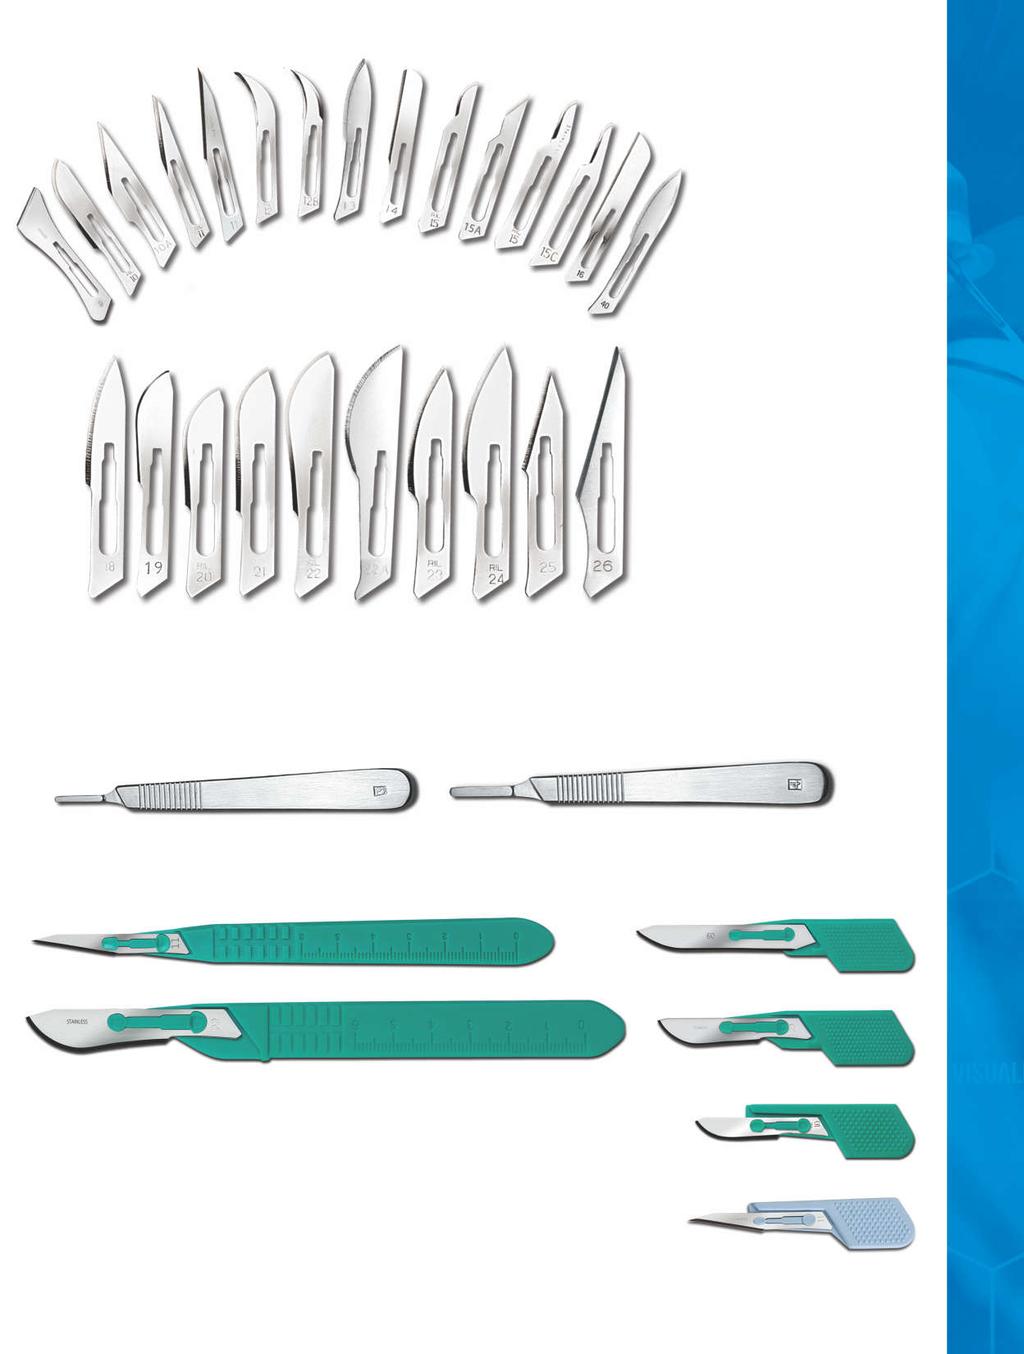 SURGICAL BLADES Available in both stainless and carbon steel. Numbers 10, 10A, 11, 11P, 12, 12B/12D, 13, 14, 15, 15T, 15C, 15A, 16,17, 40 fit handle numbers 3, 3L, 5, 7 & 9.